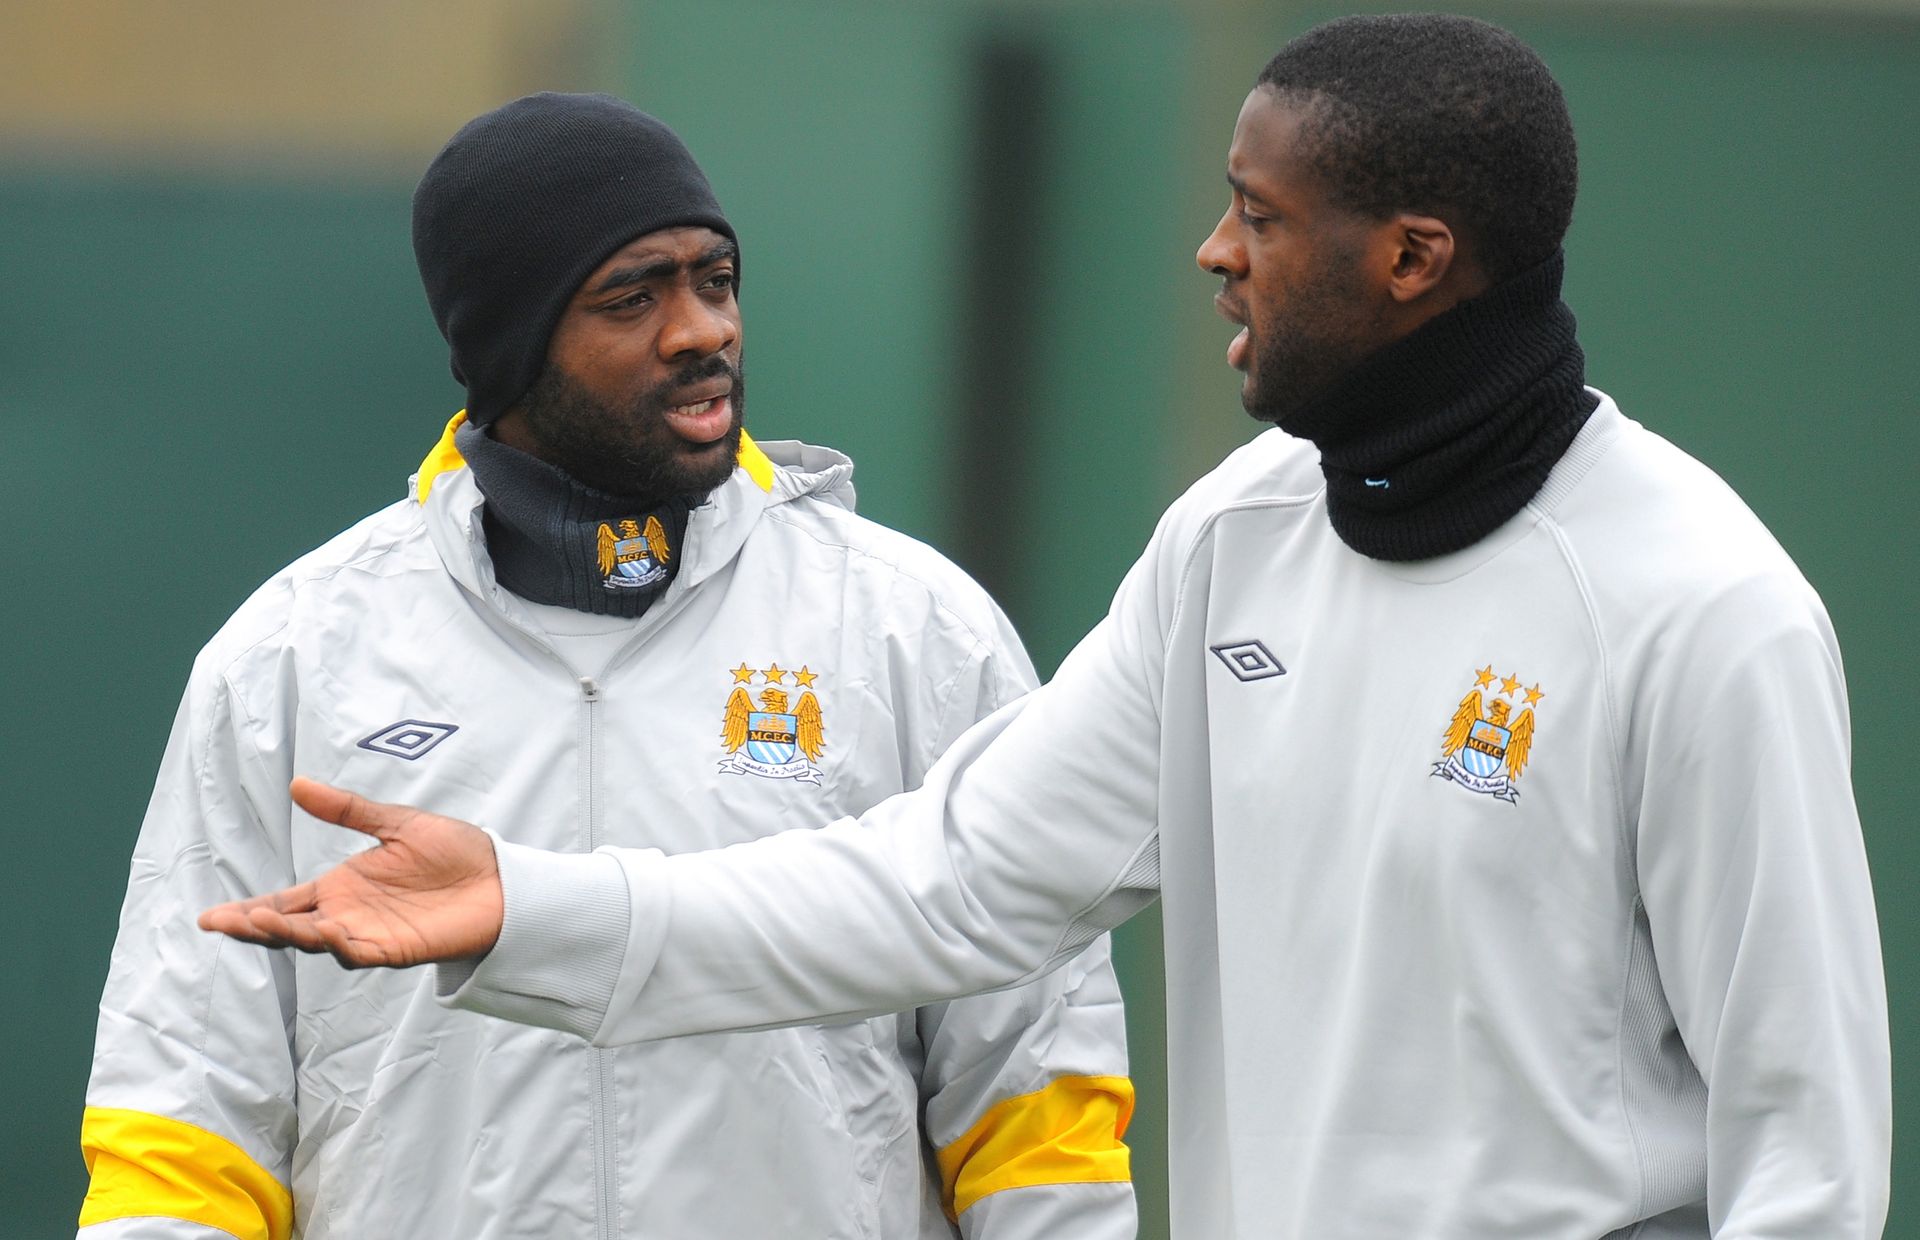 <p>                     Kolo Toure and brother Yaya each made over 100 appearances for Ivory Coast and the pair were part of the team which won the Africa Cup of Nations in 2015.                   </p>                                      <p>                     Centre-back Kolo won Premier League titles at Arsenal and Manchester City, where he played with his brother. Yaya, meanwhile, is a City legend after a long spell with the club which included three Premier League titles. Previously, the midfielder had been part of Barcelona's treble-winning squad in 2008/09.                   </p>